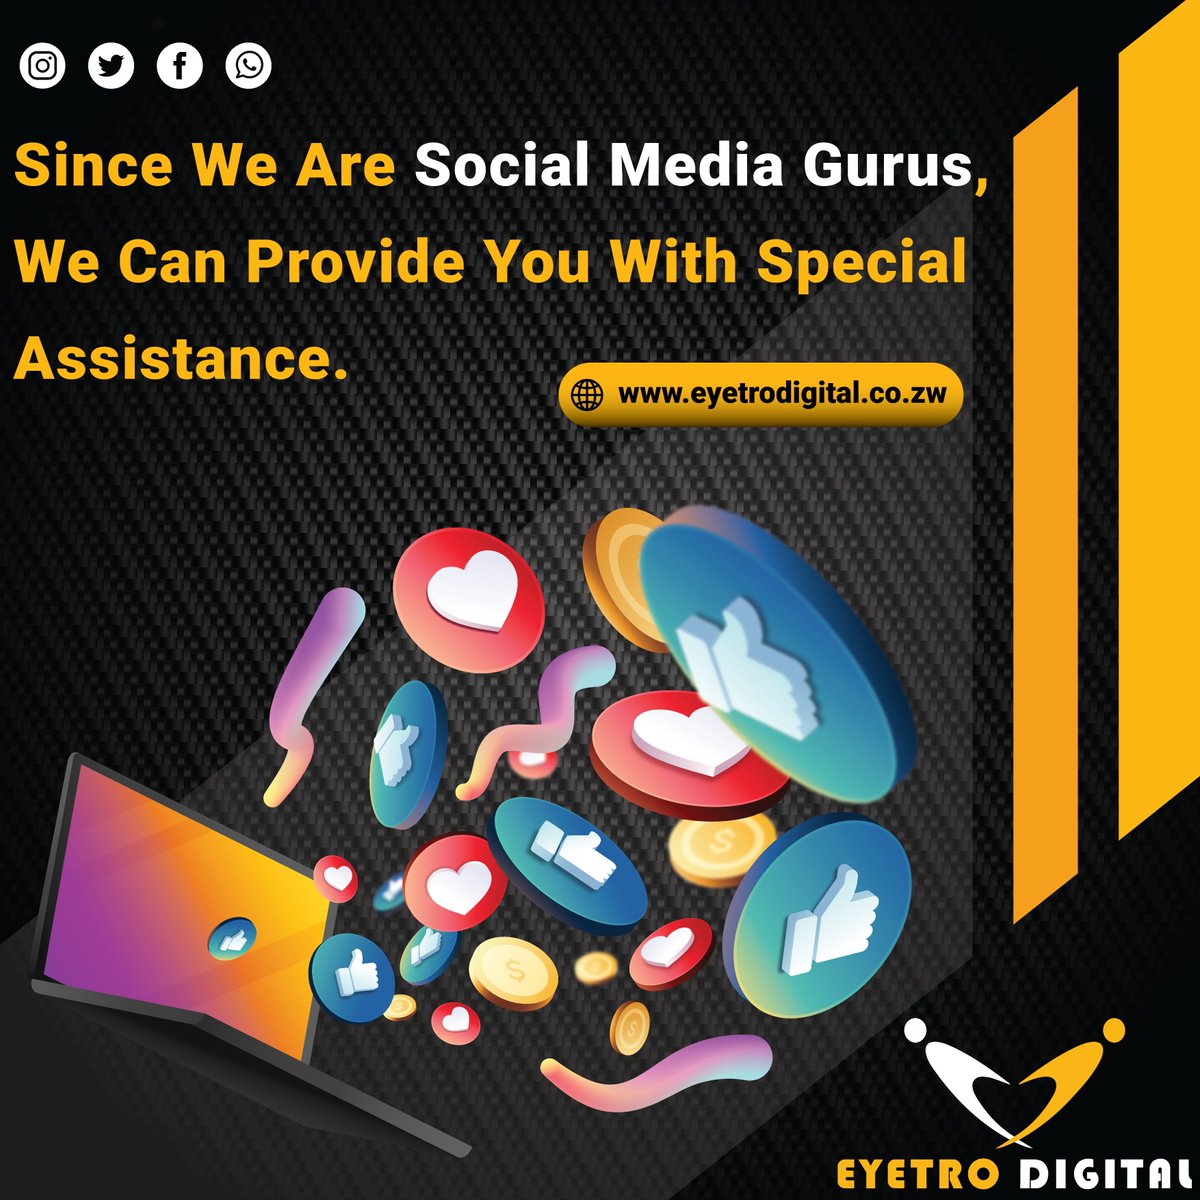 Unlock the power of social media with our expert services! Let us help you reach your target audience, increase engagement, and drive results. Contact us today to learn more. 
#SocialMediaExperts #DigitalMarketing #SocialMediaManagement #SocialMedia #Mahere #RTGS #iOS16 #Eyetro